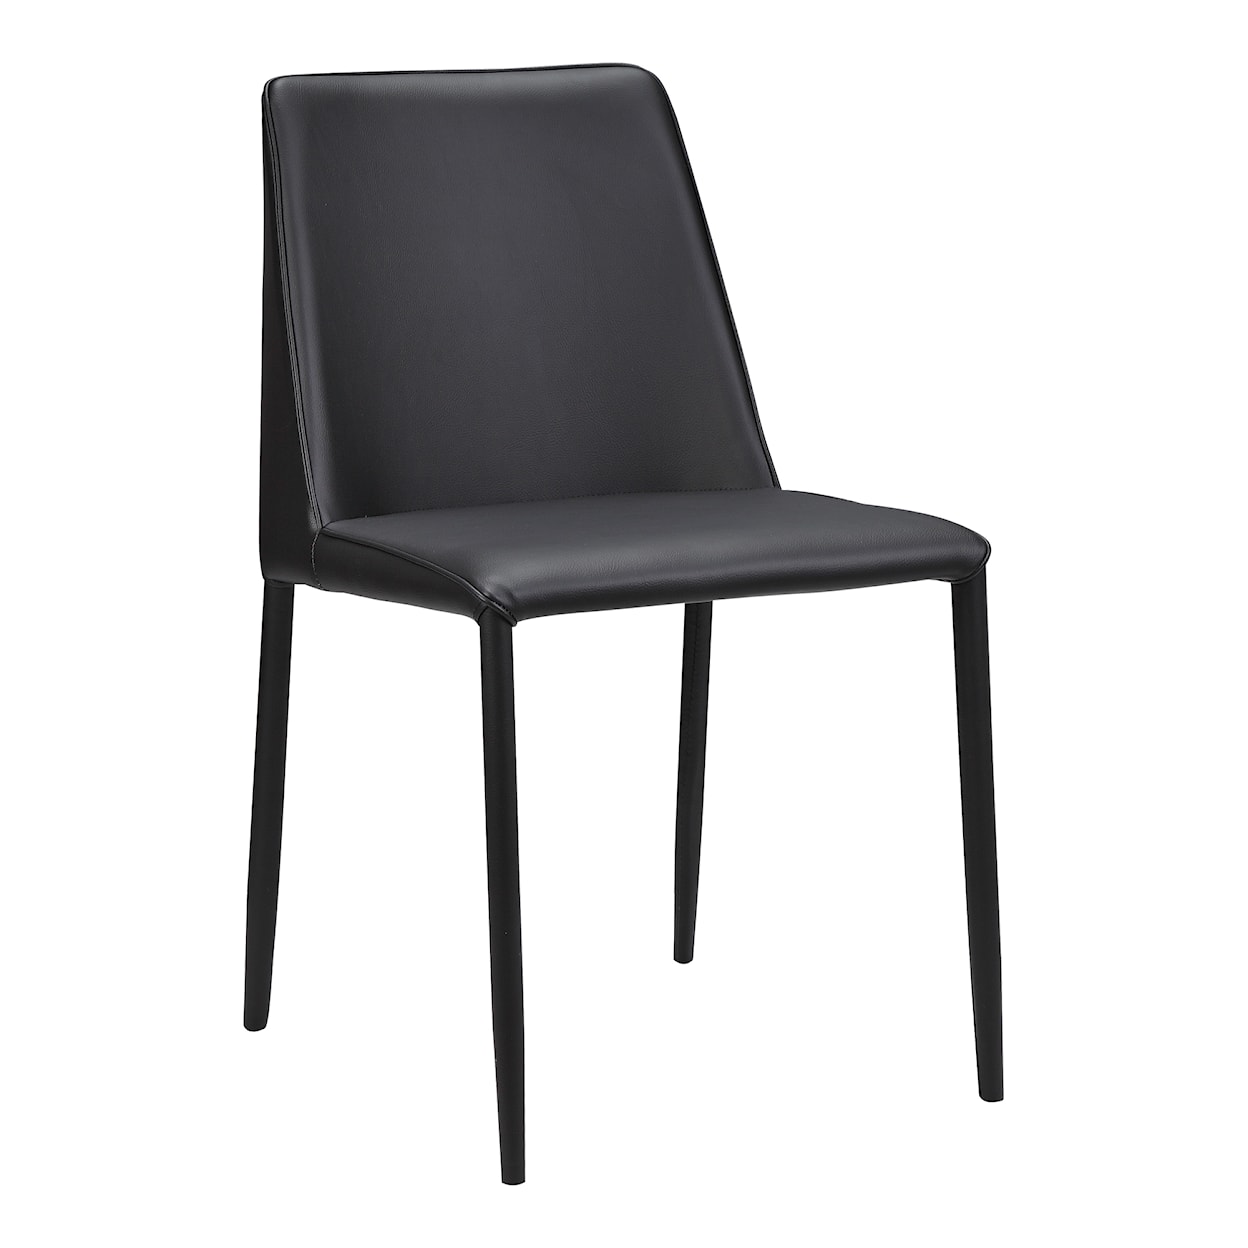 Moe's Home Collection Nora Black Vegan Leather Dining Chair